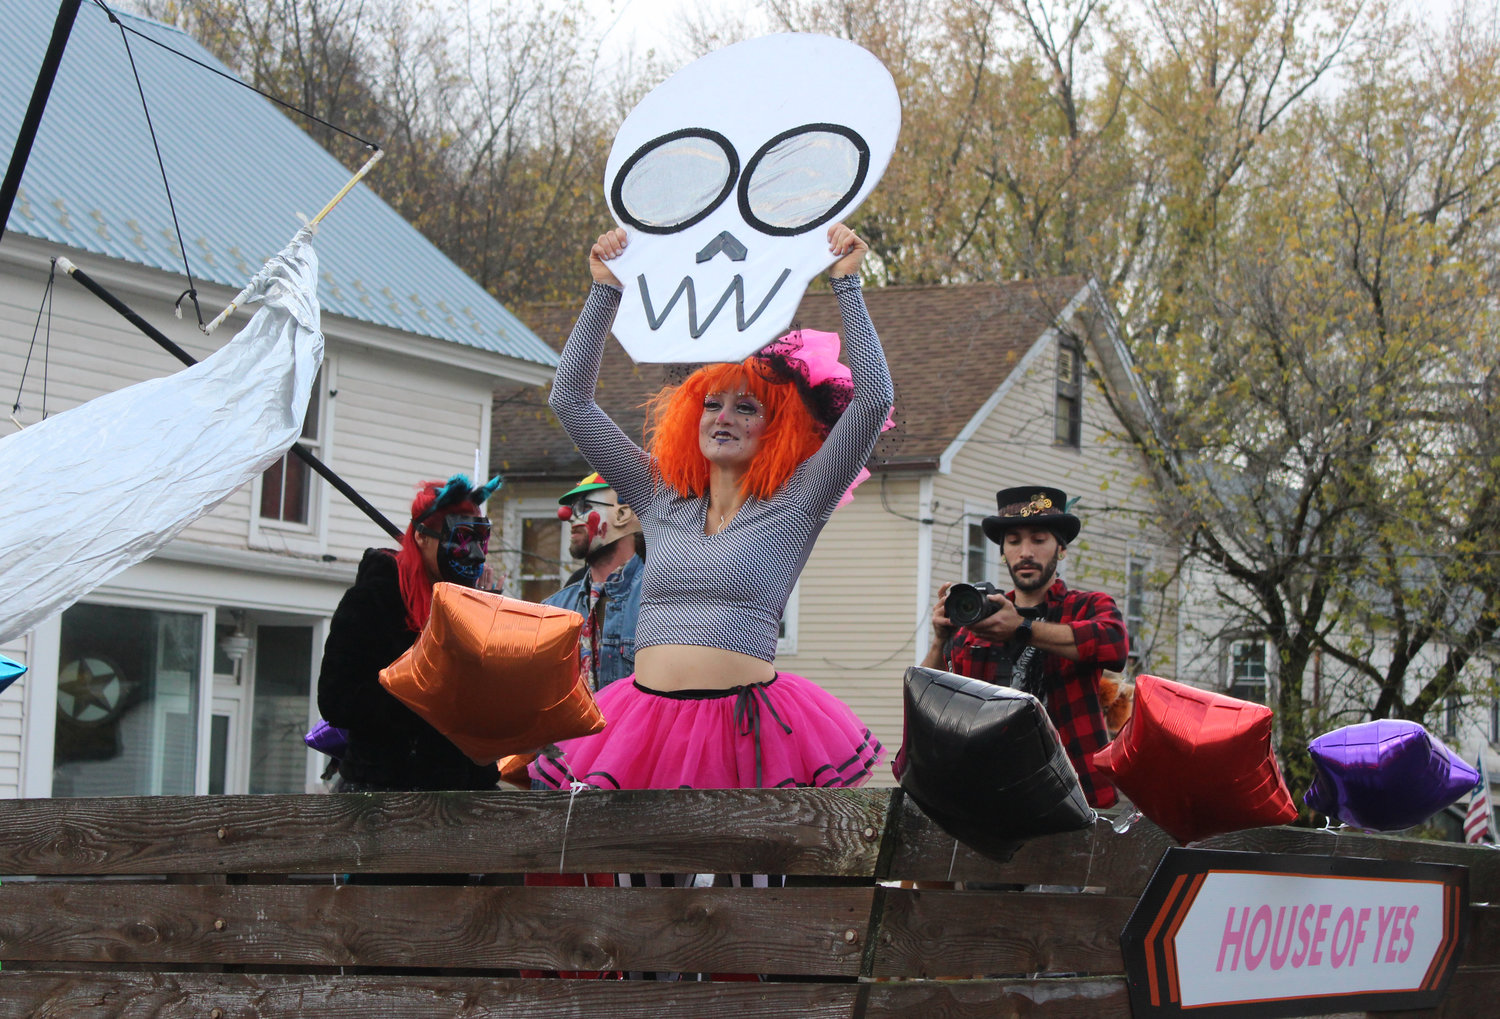 The House of Yes added lots of color and talent during the first annual Halloween Parade in Parksville.